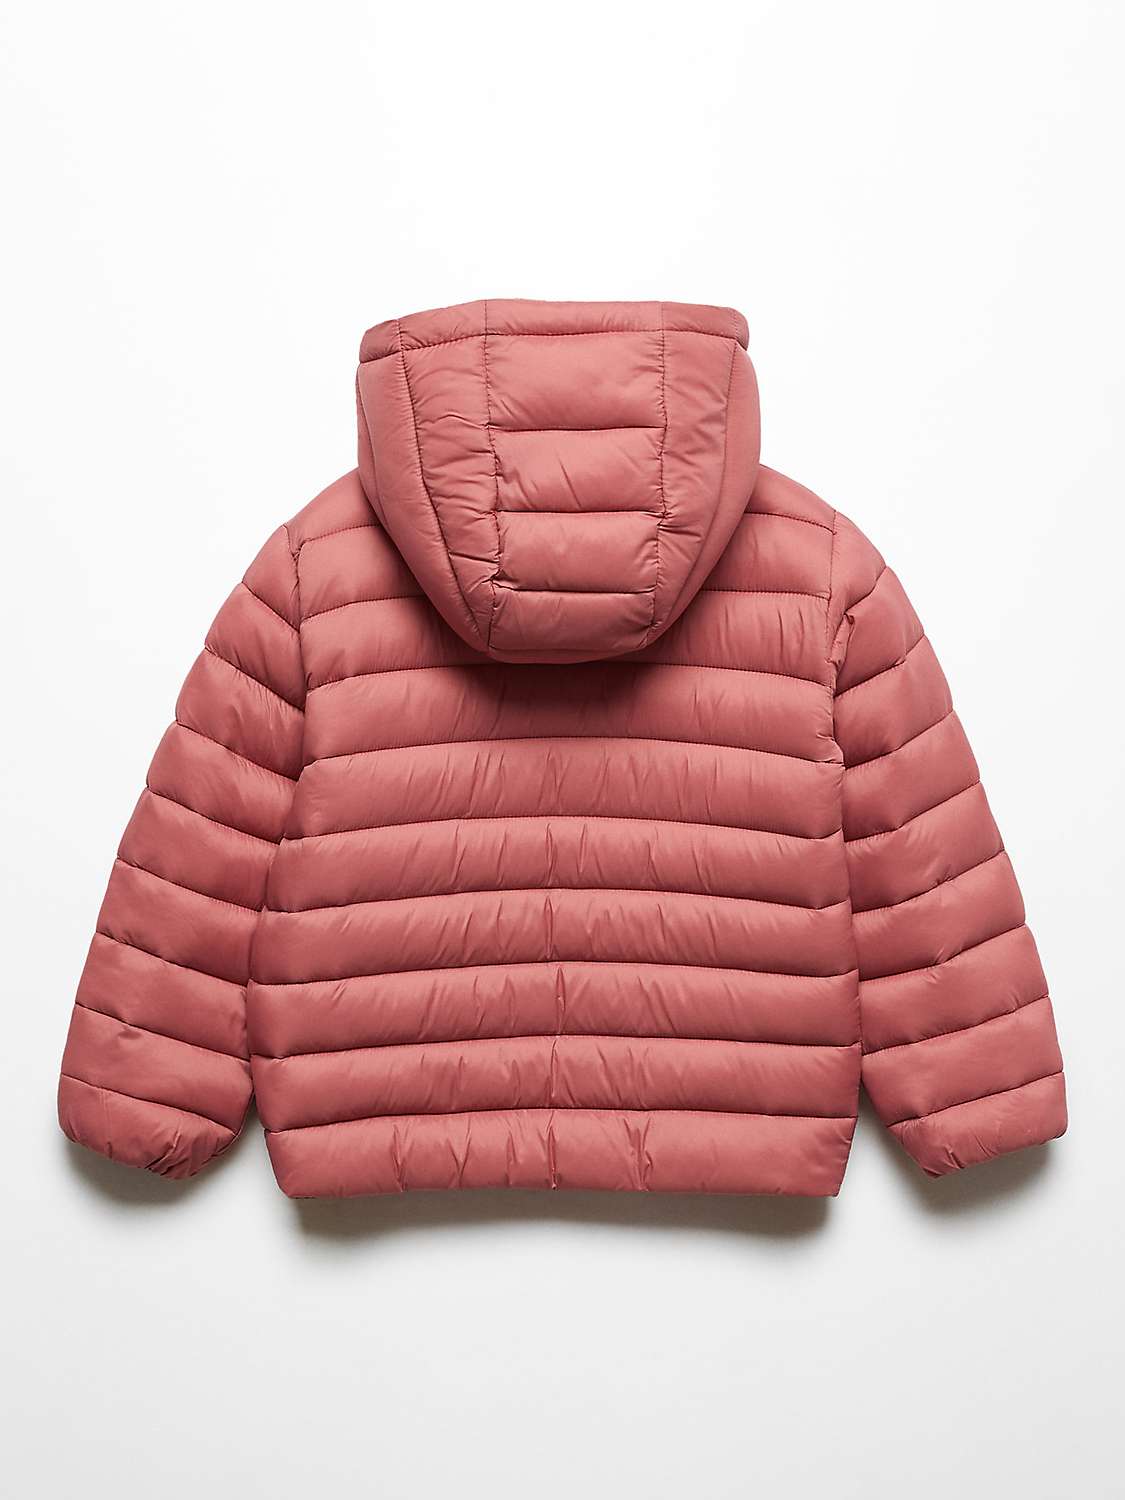 Buy Mango Kids' Paola Quilted Hooded Jacket, Dark Red Online at johnlewis.com